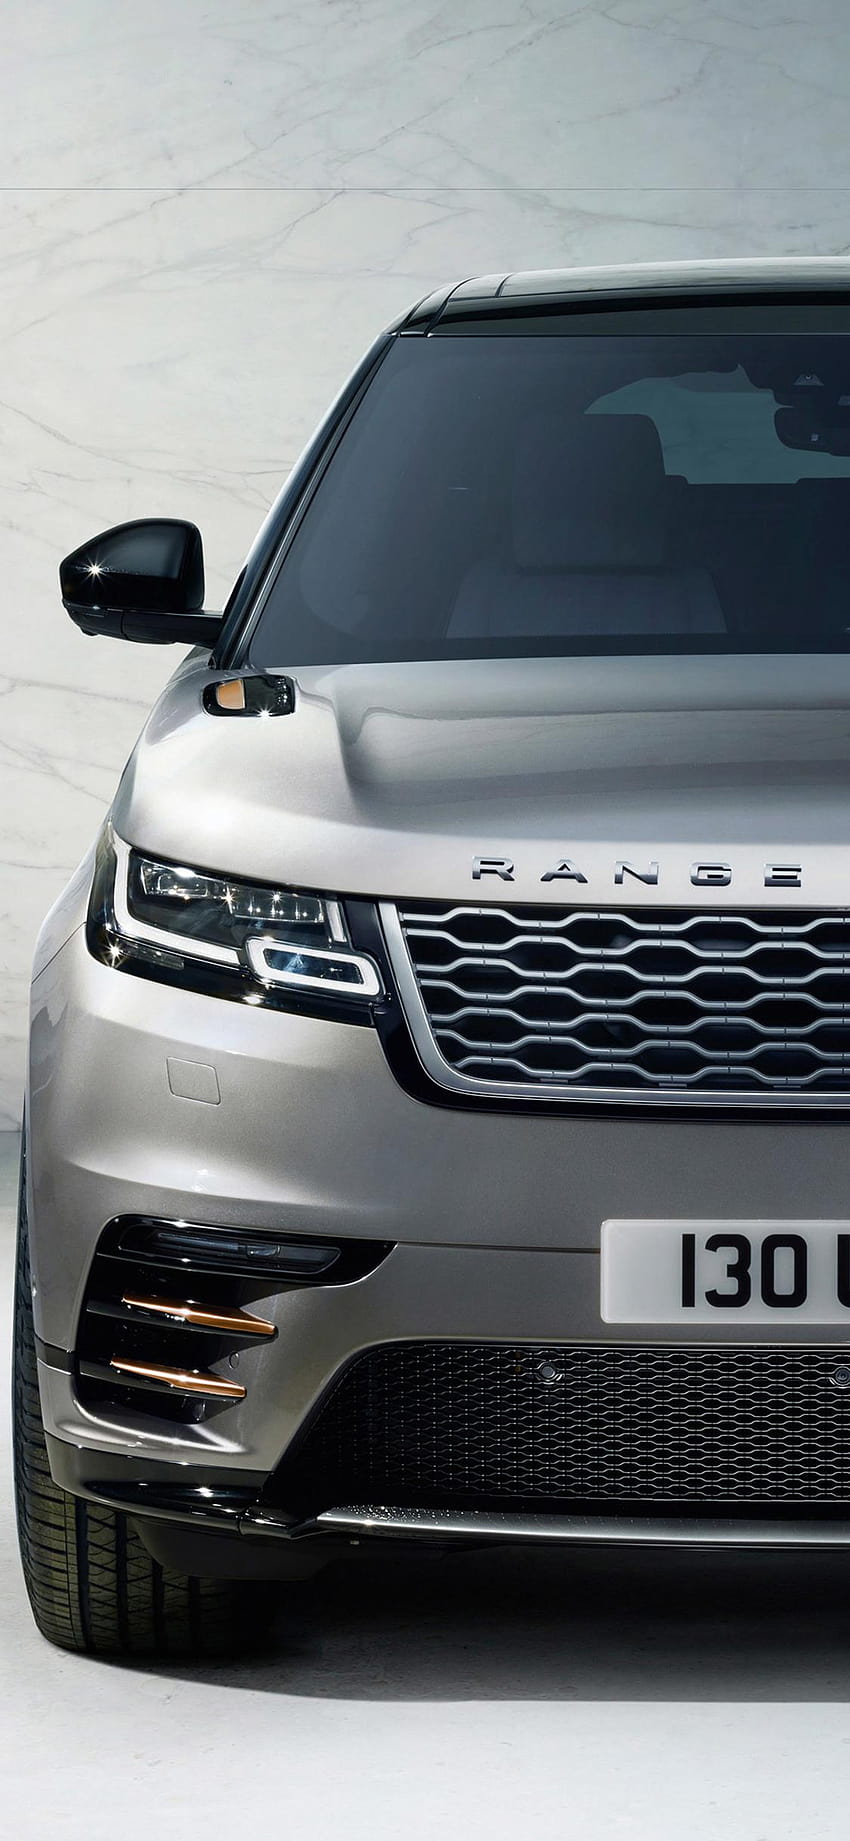 1125x2436 Range Rover Velar 2018 Iphone XS,Iphone 10,Iphone, range rover android HD phone wallpaper